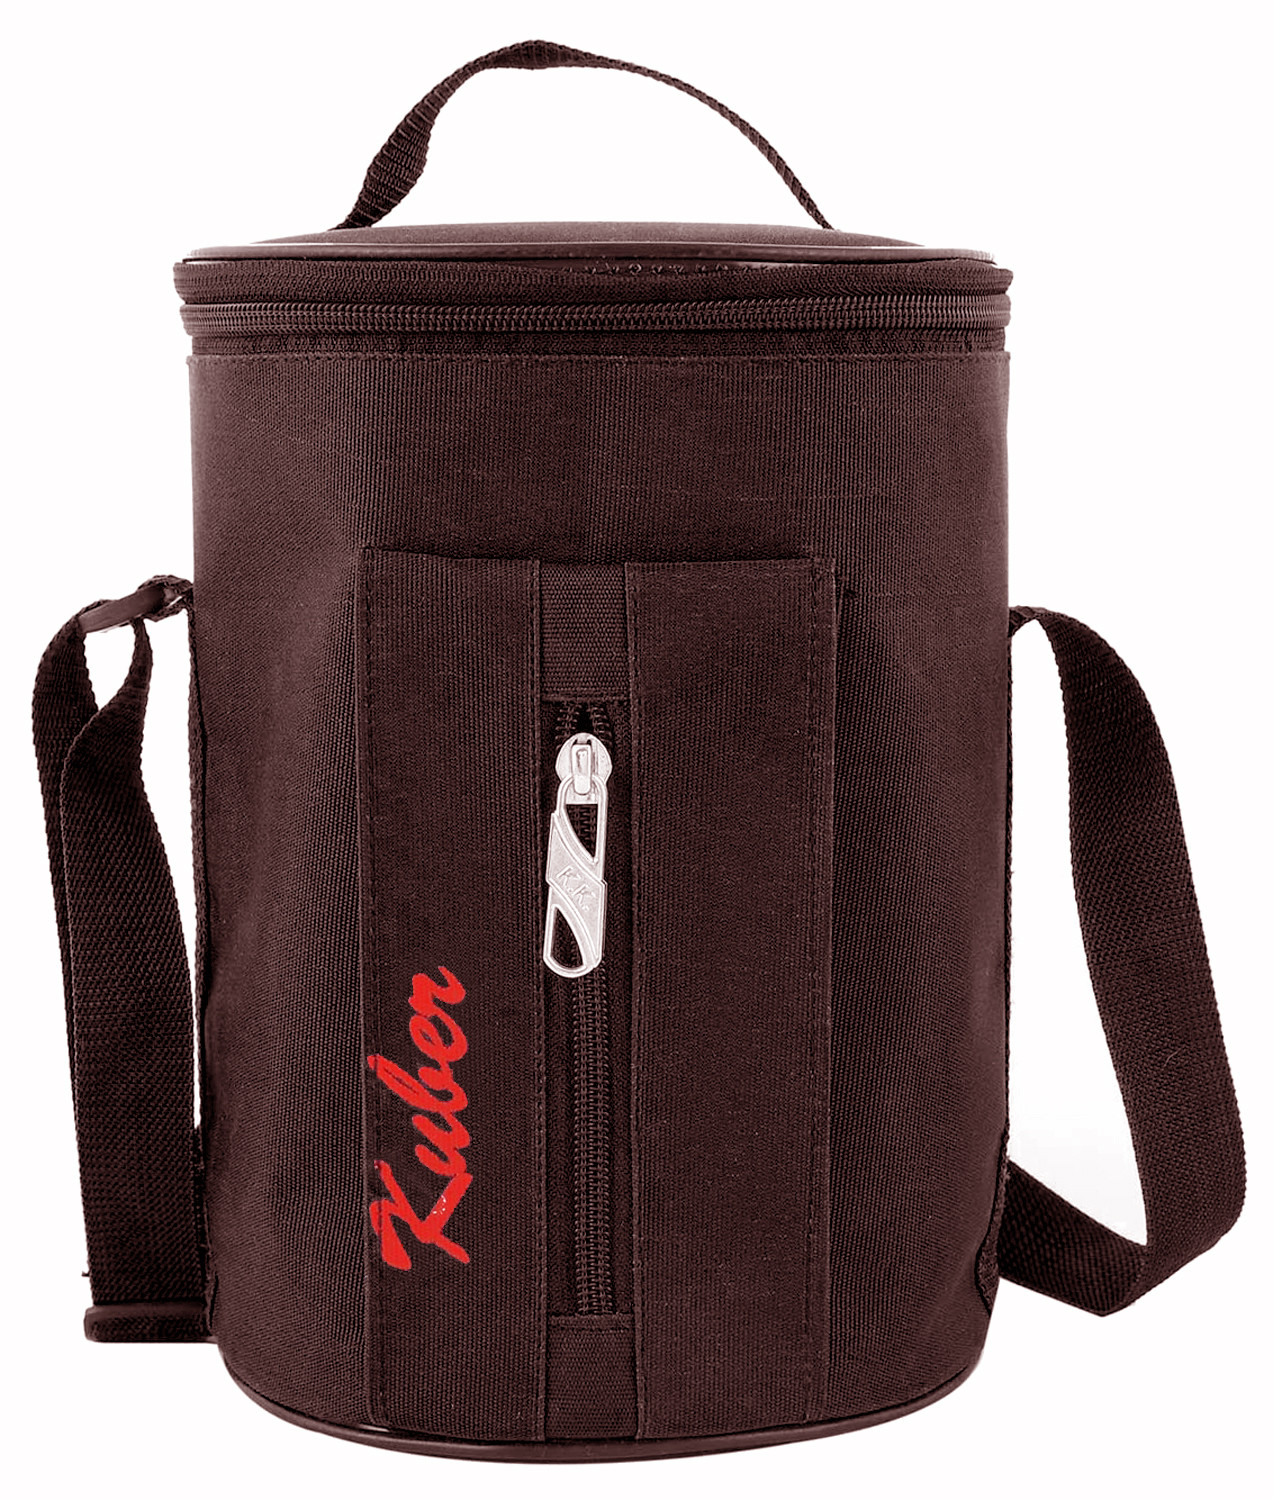 Kuber Industries Canvas Lunch Bag for Men, Women And Kids, Lunch Bag for School, Picnic, Office, Carry Bag for Lunch Box (Brown)